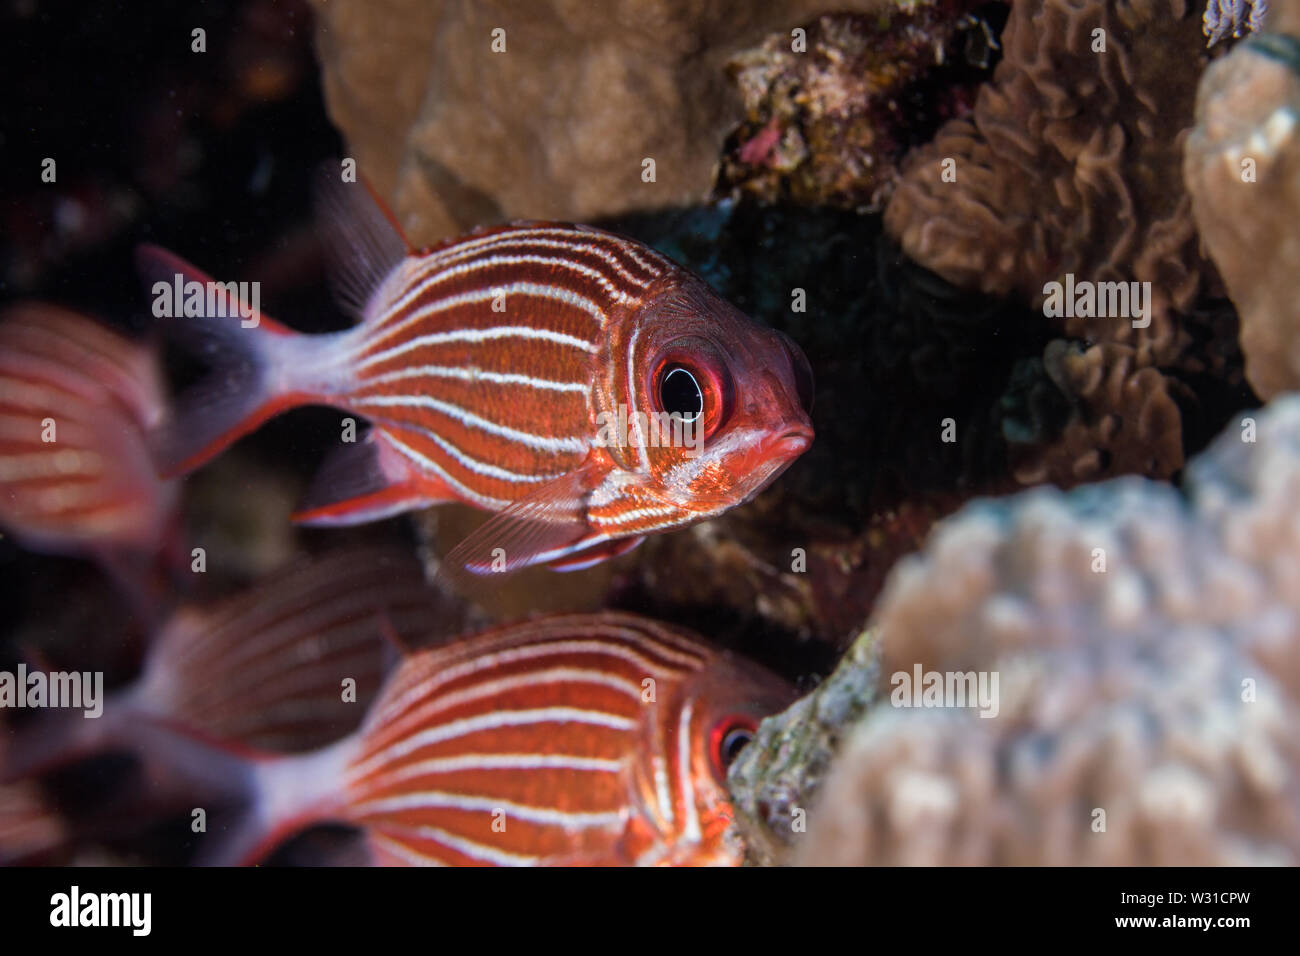 Crown squirrelfish (Sargocentron diadema) bright metallic orange/ red colored fish with white stripes down the side of the body close up. Stock Photo